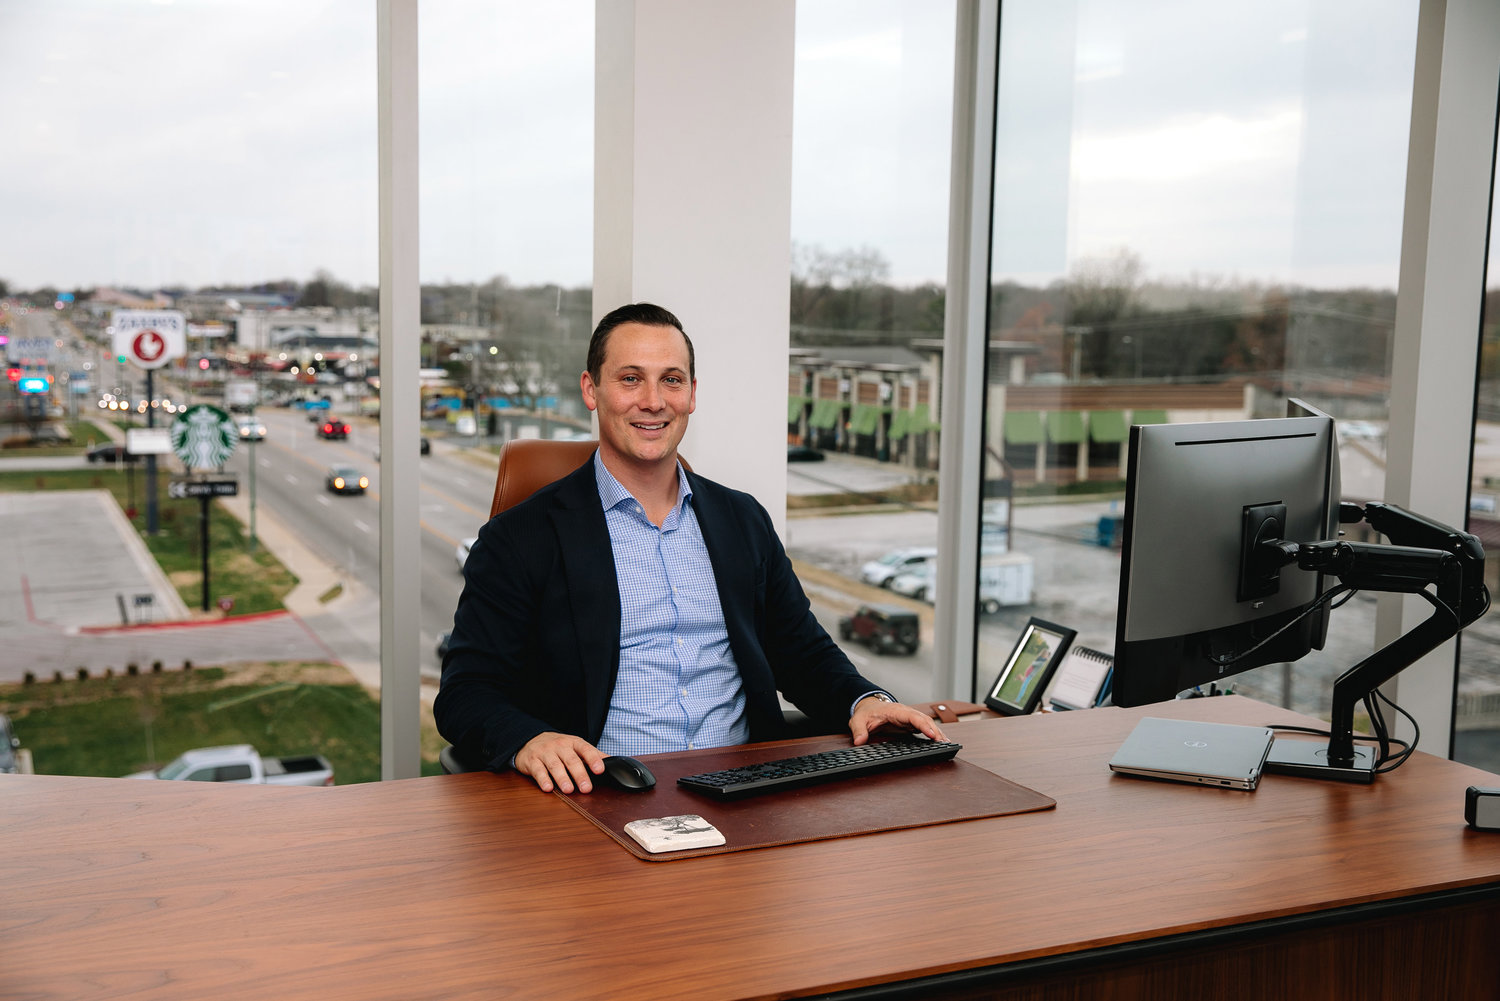 Brett Magers and his team are doubling down on affordable housing, new market tax credits and other government programs - and keeping an eye on digitized banking.